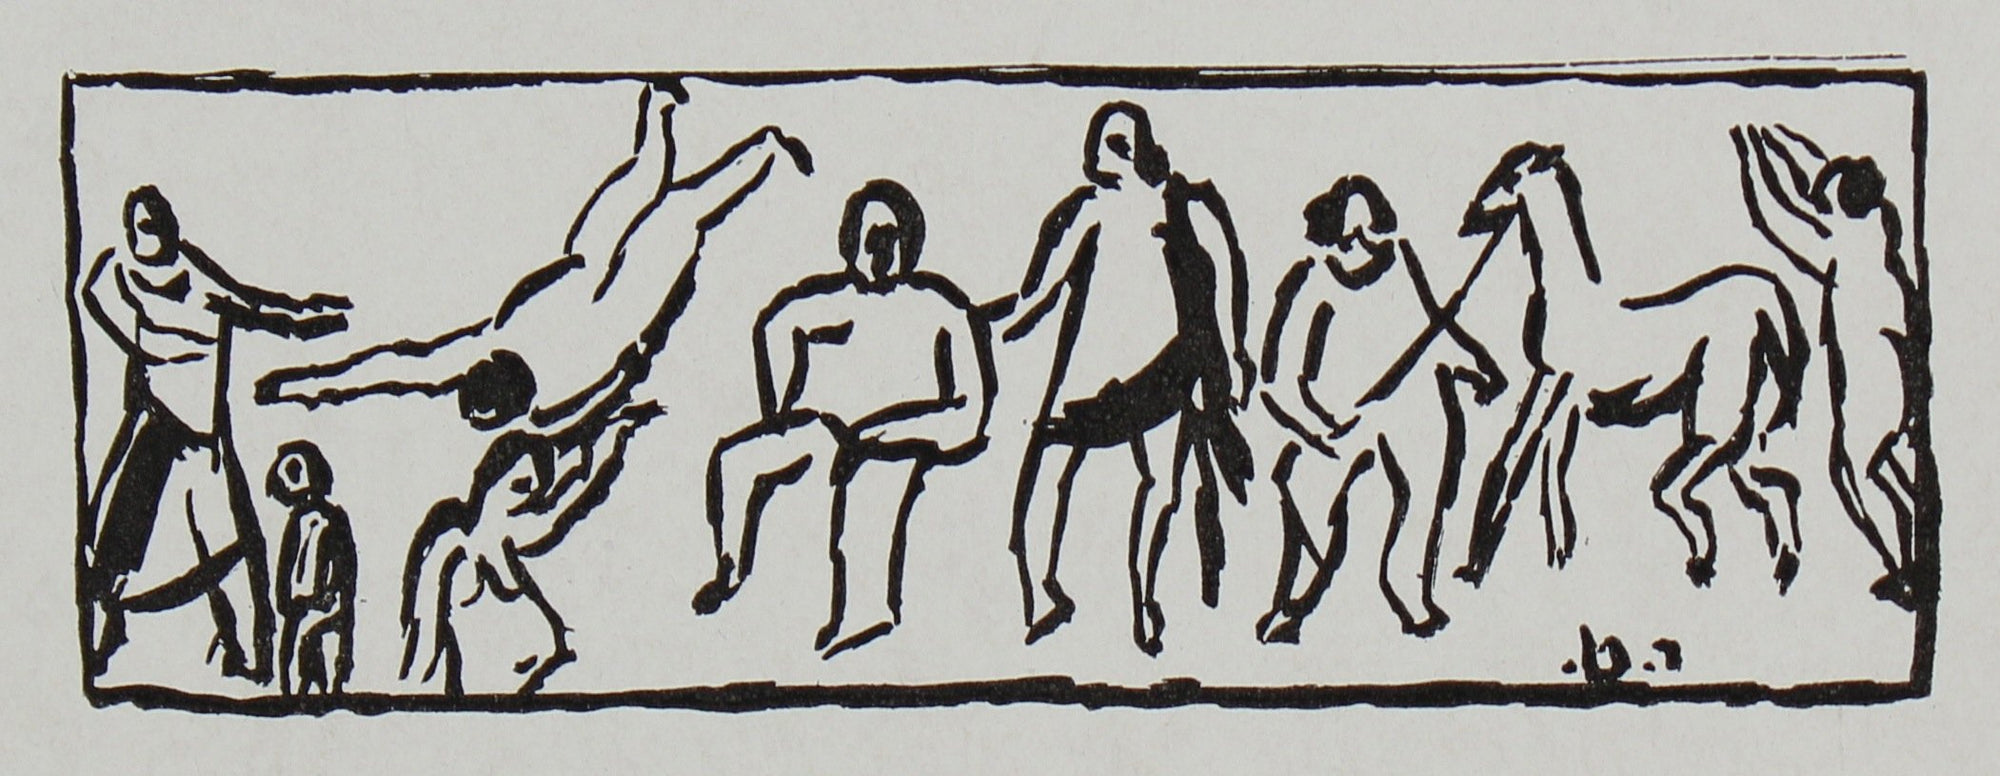 Expressionist Figures Scene with Horse <br>Early 20th Century Mimeograph <br><br>#95880